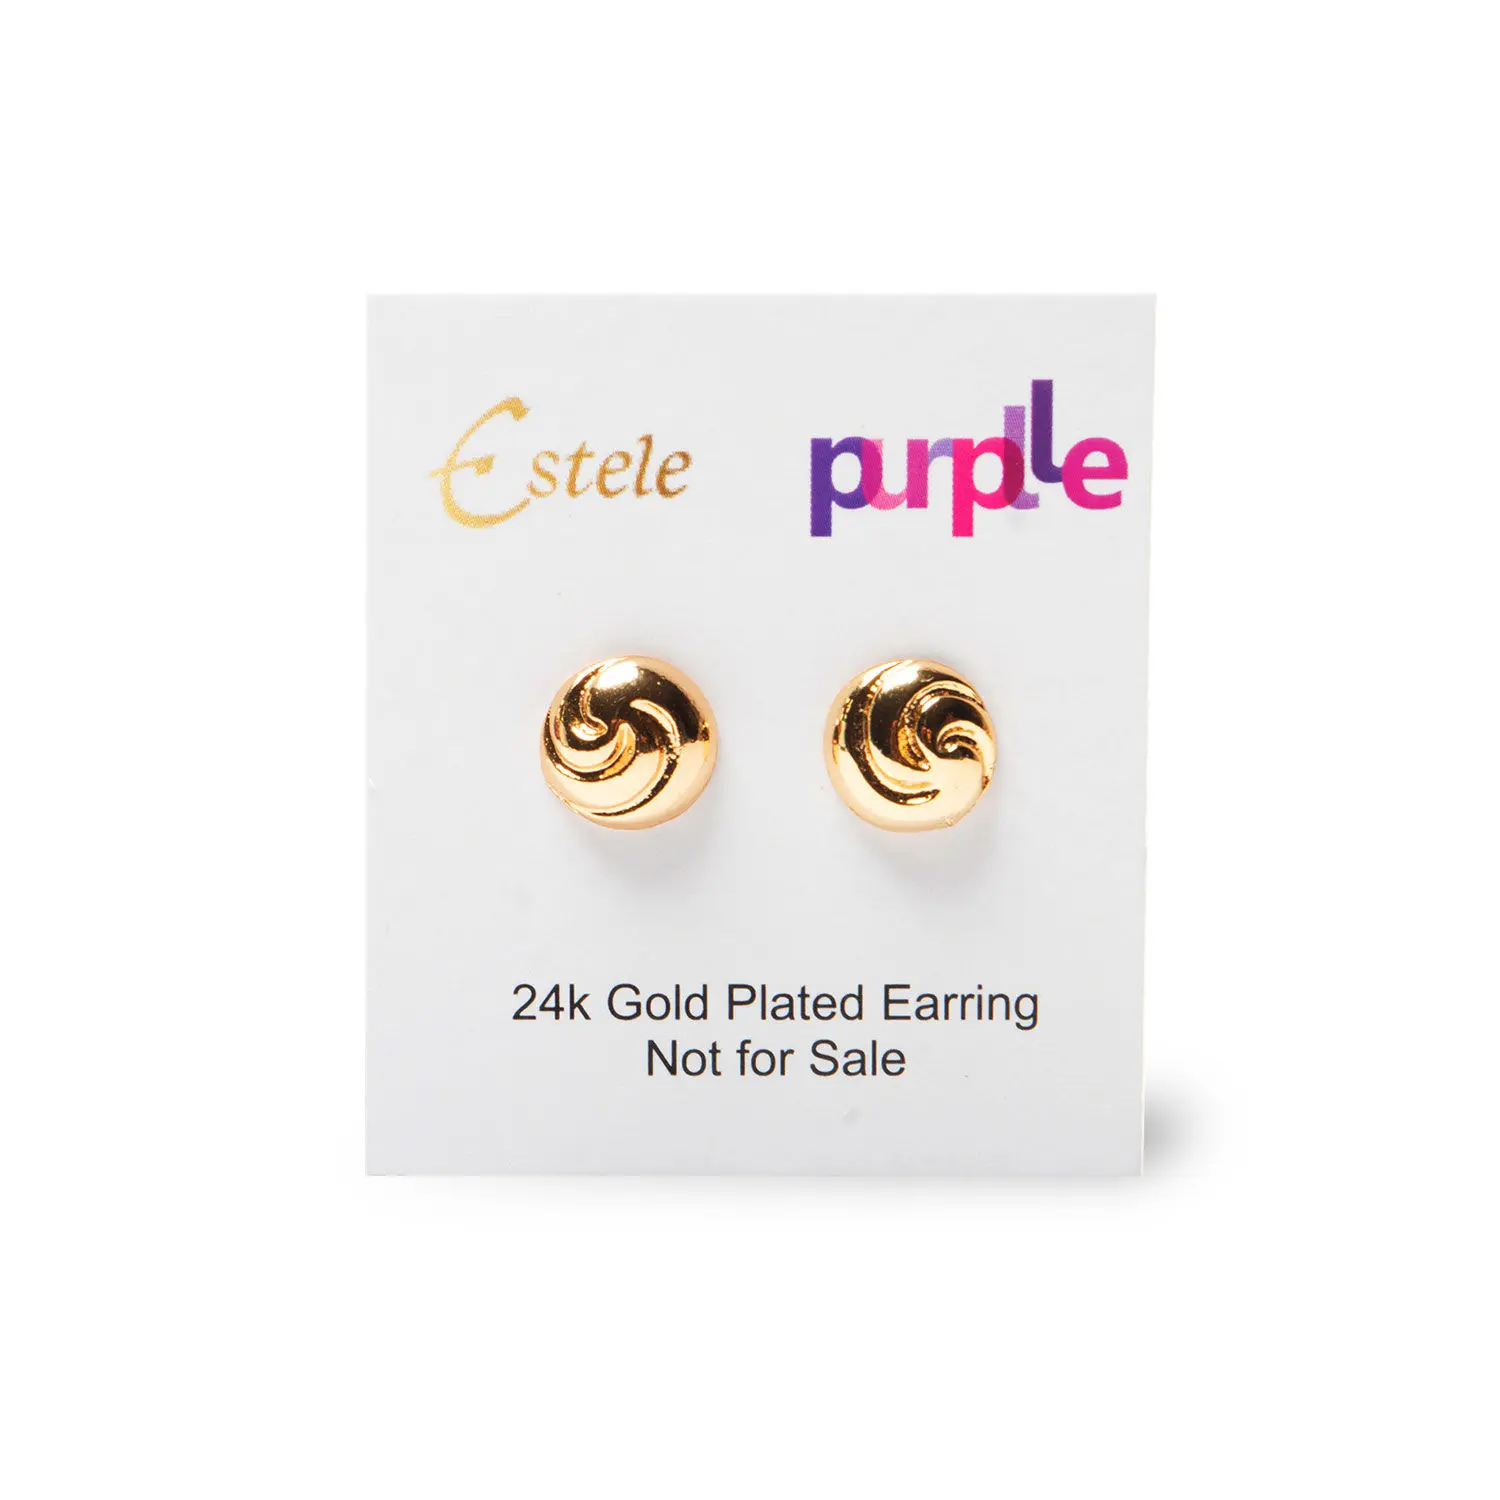 NYBae Gold Plated Earrings by Estelle